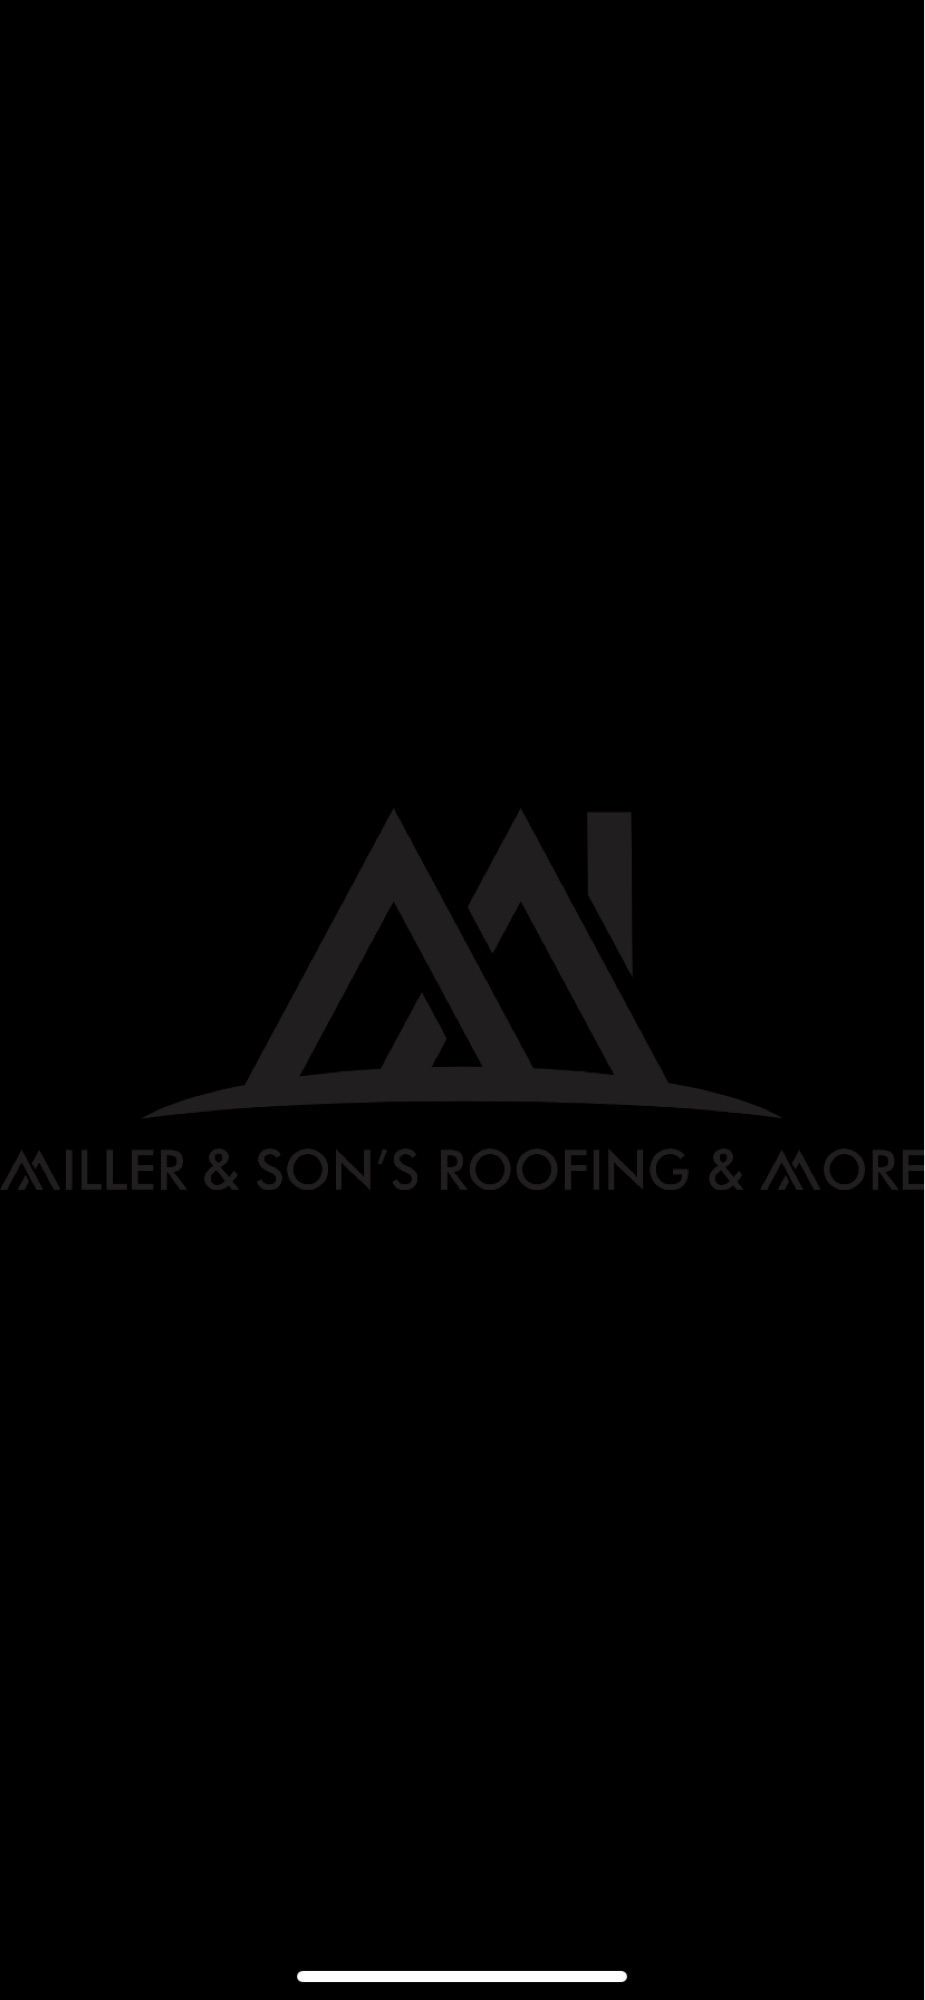 Miller and Son's Roofing and More, LLC Logo